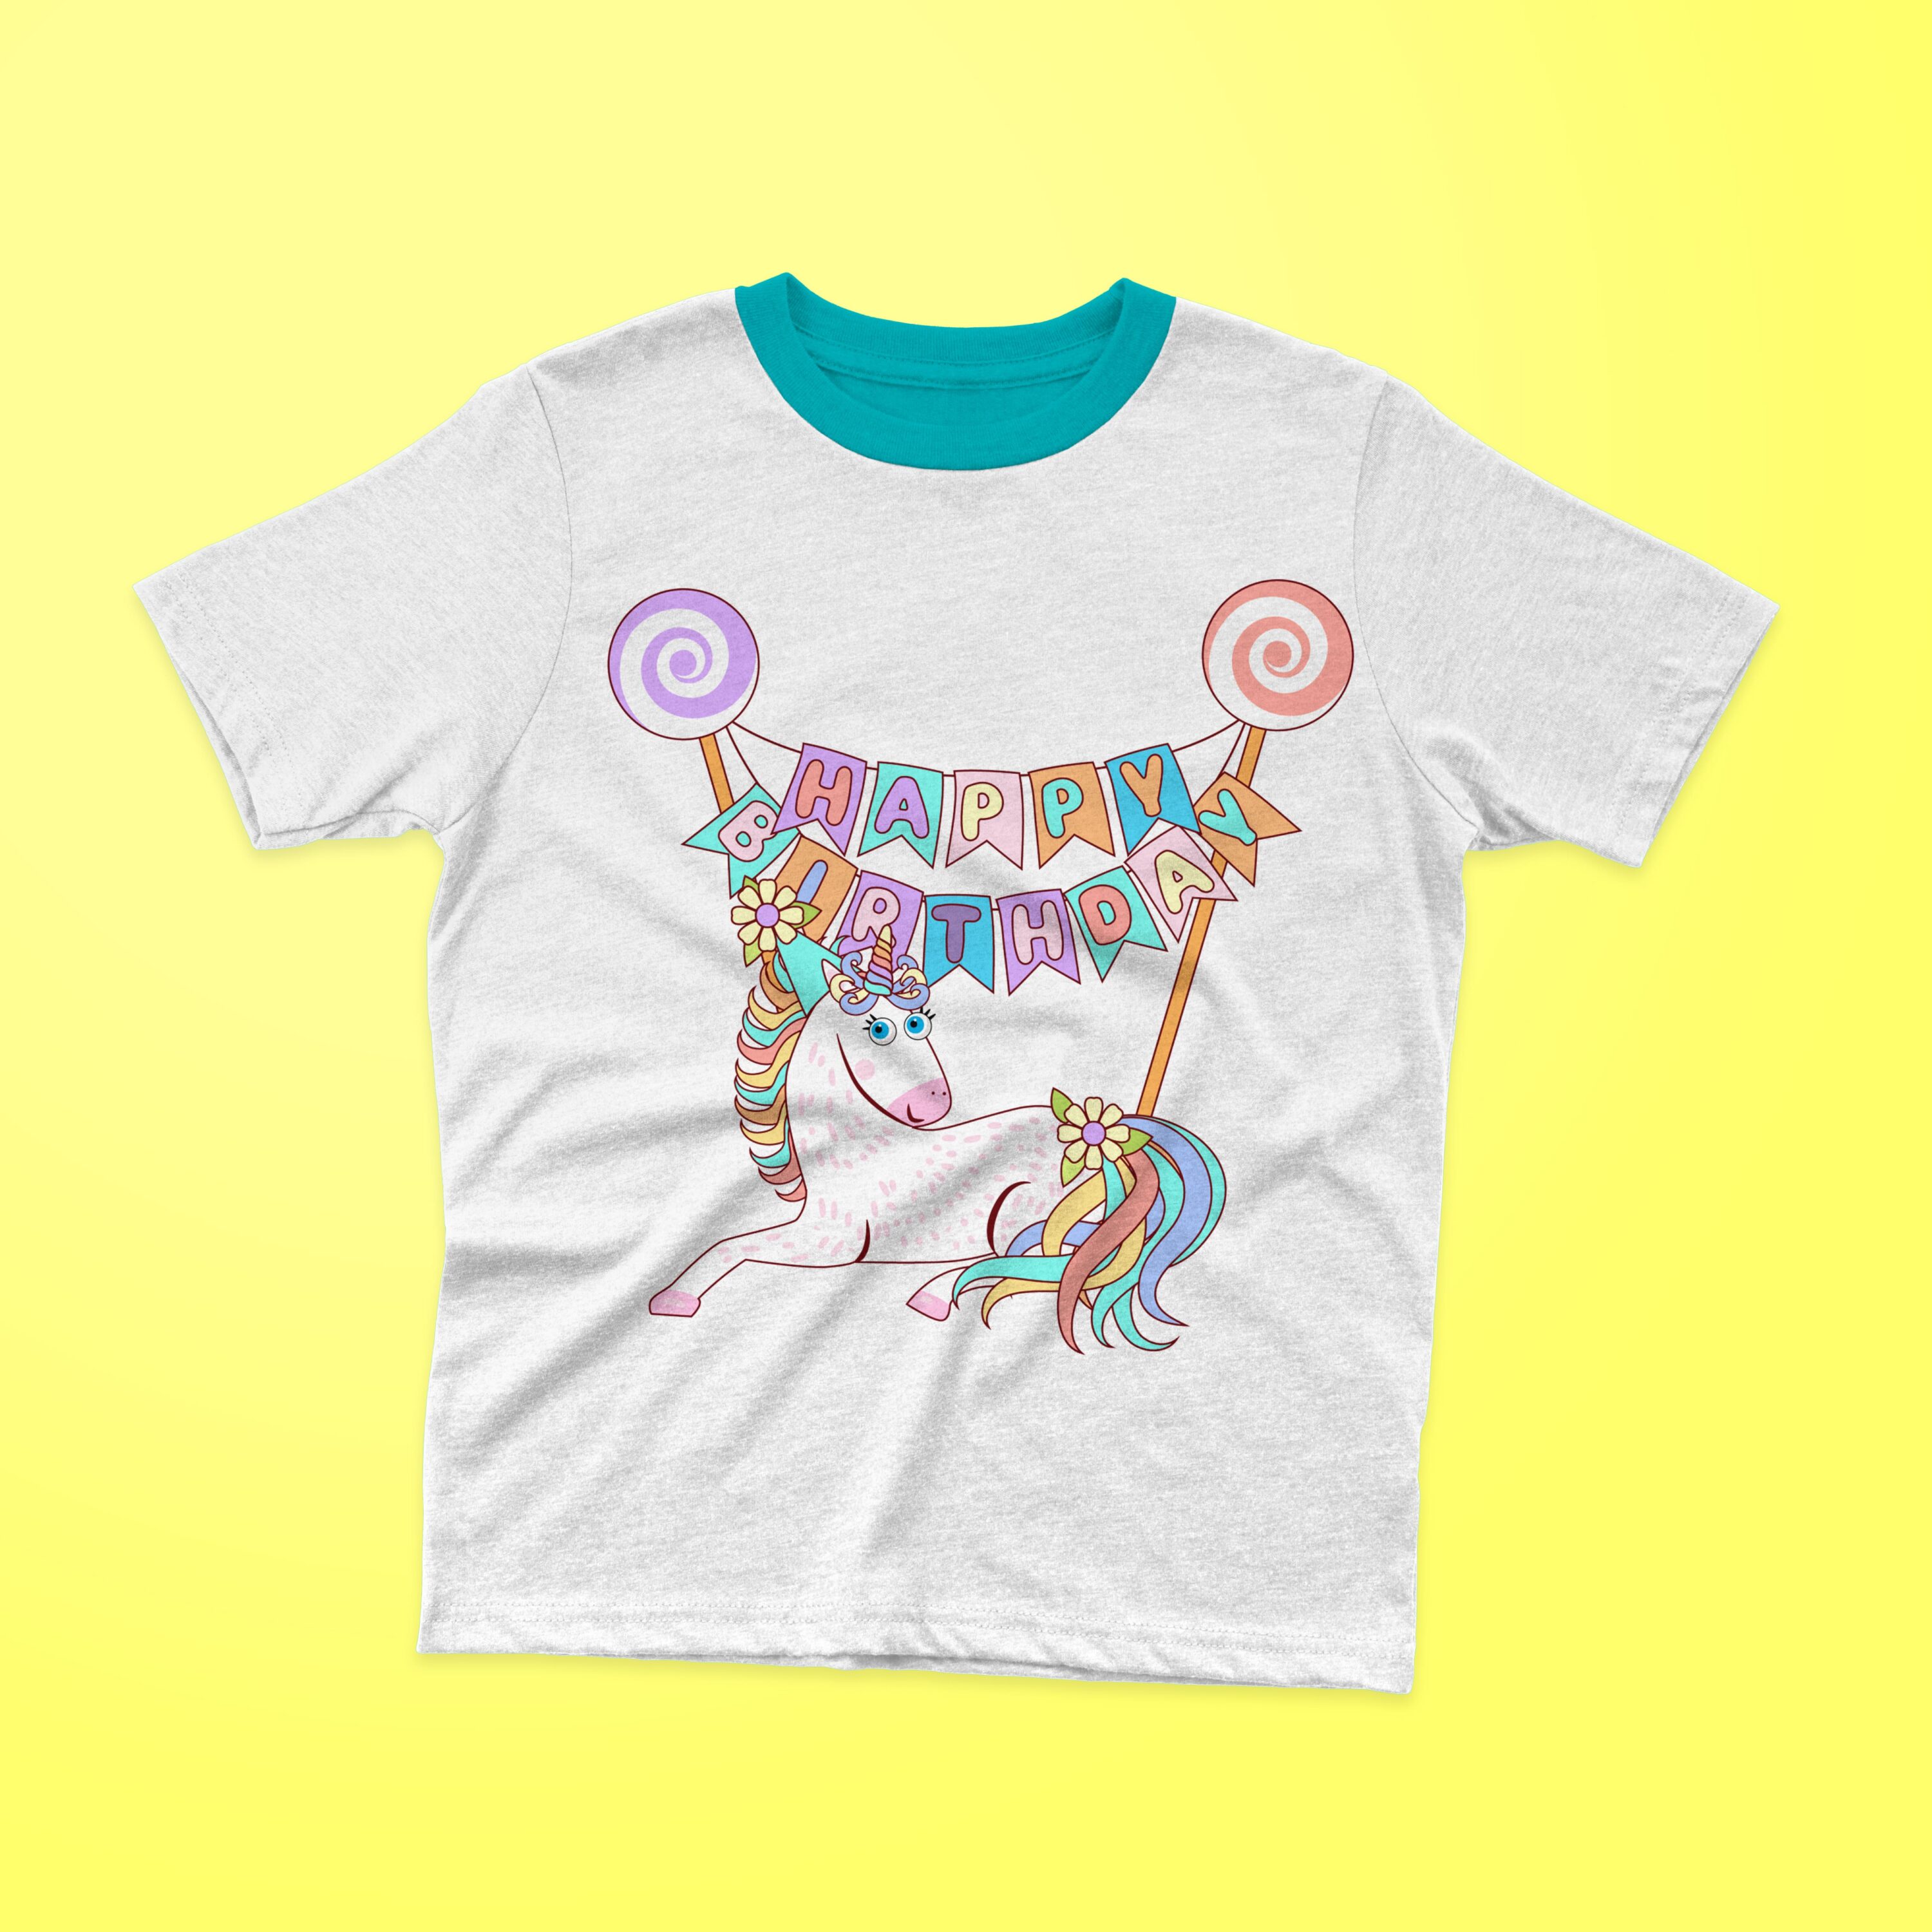 White t-shirt with a turquoise collar and a lying unicorn with colorful lettering "HAPPY BIRTHDAY" on a yellow background.